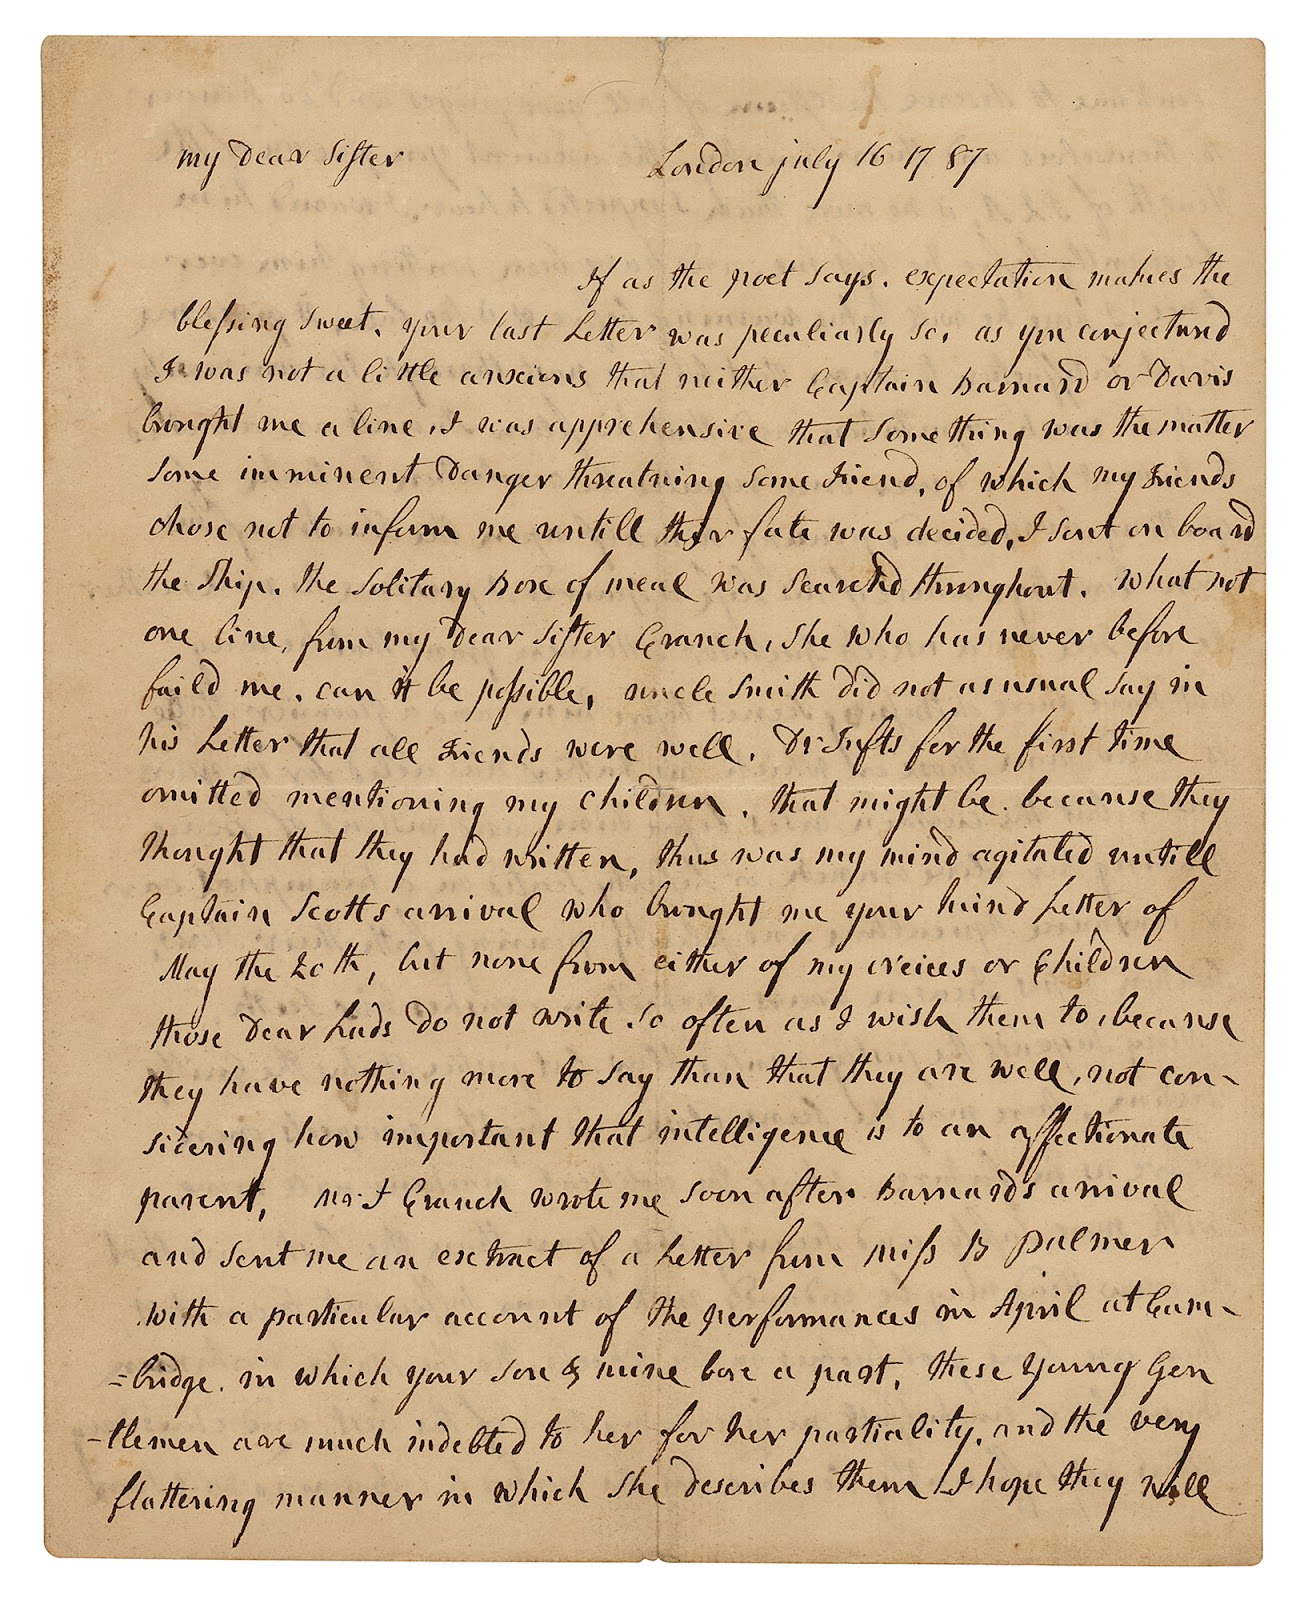 The first page of Adams’ letter, dated July 16, 1787. This lot sold for $38,454.